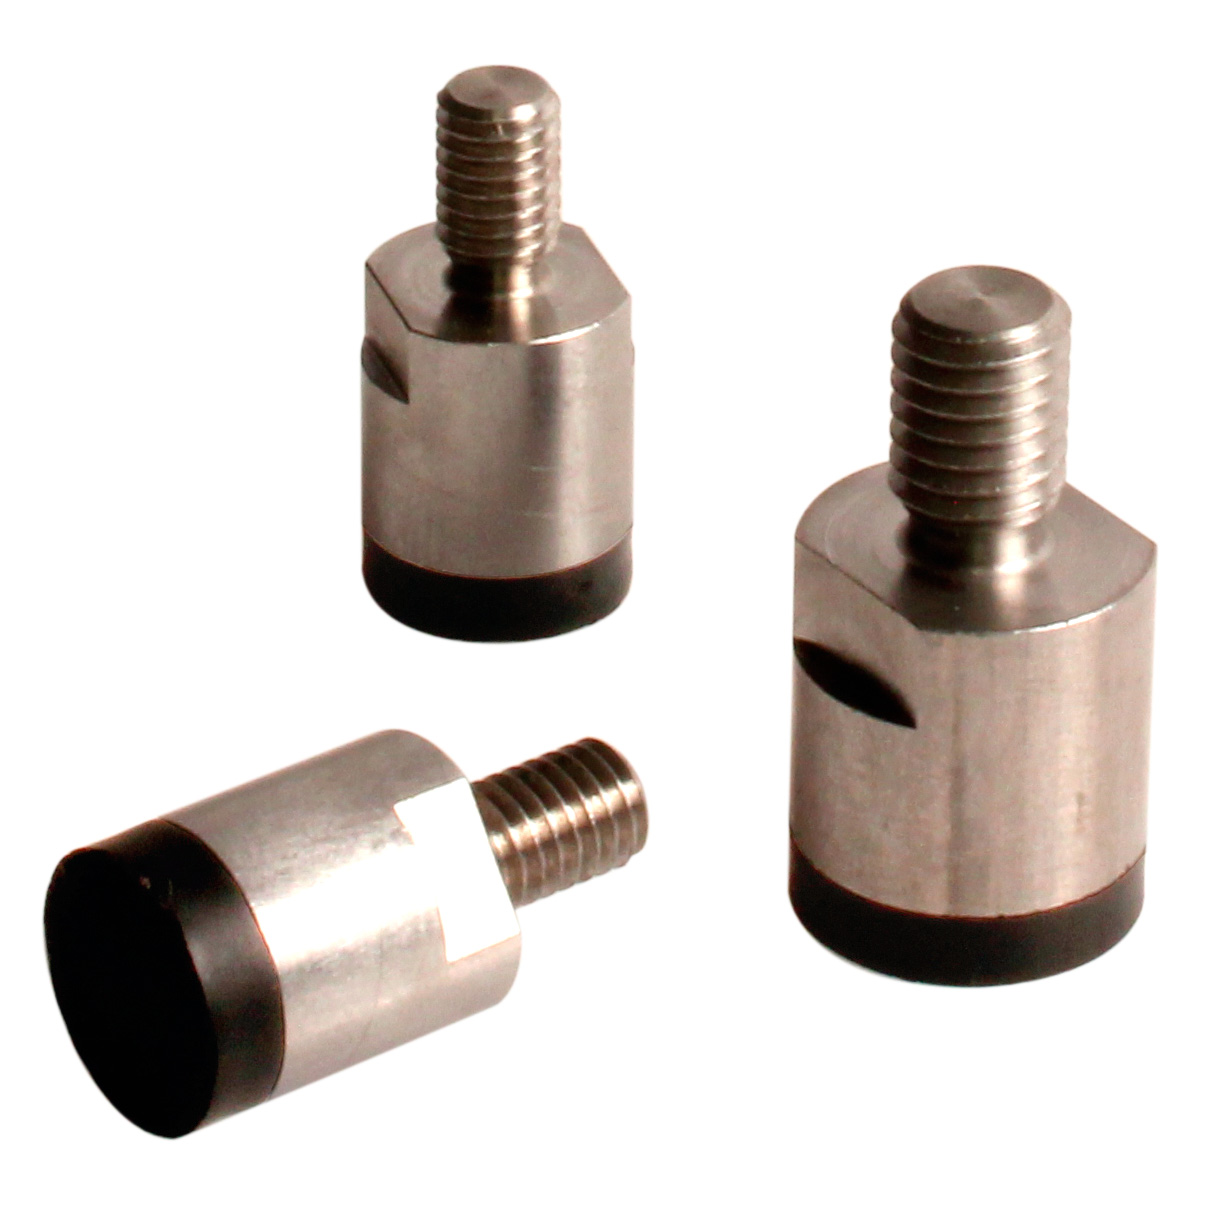 Magnetic head screw - With rubber coating
With rubber coating -  - 